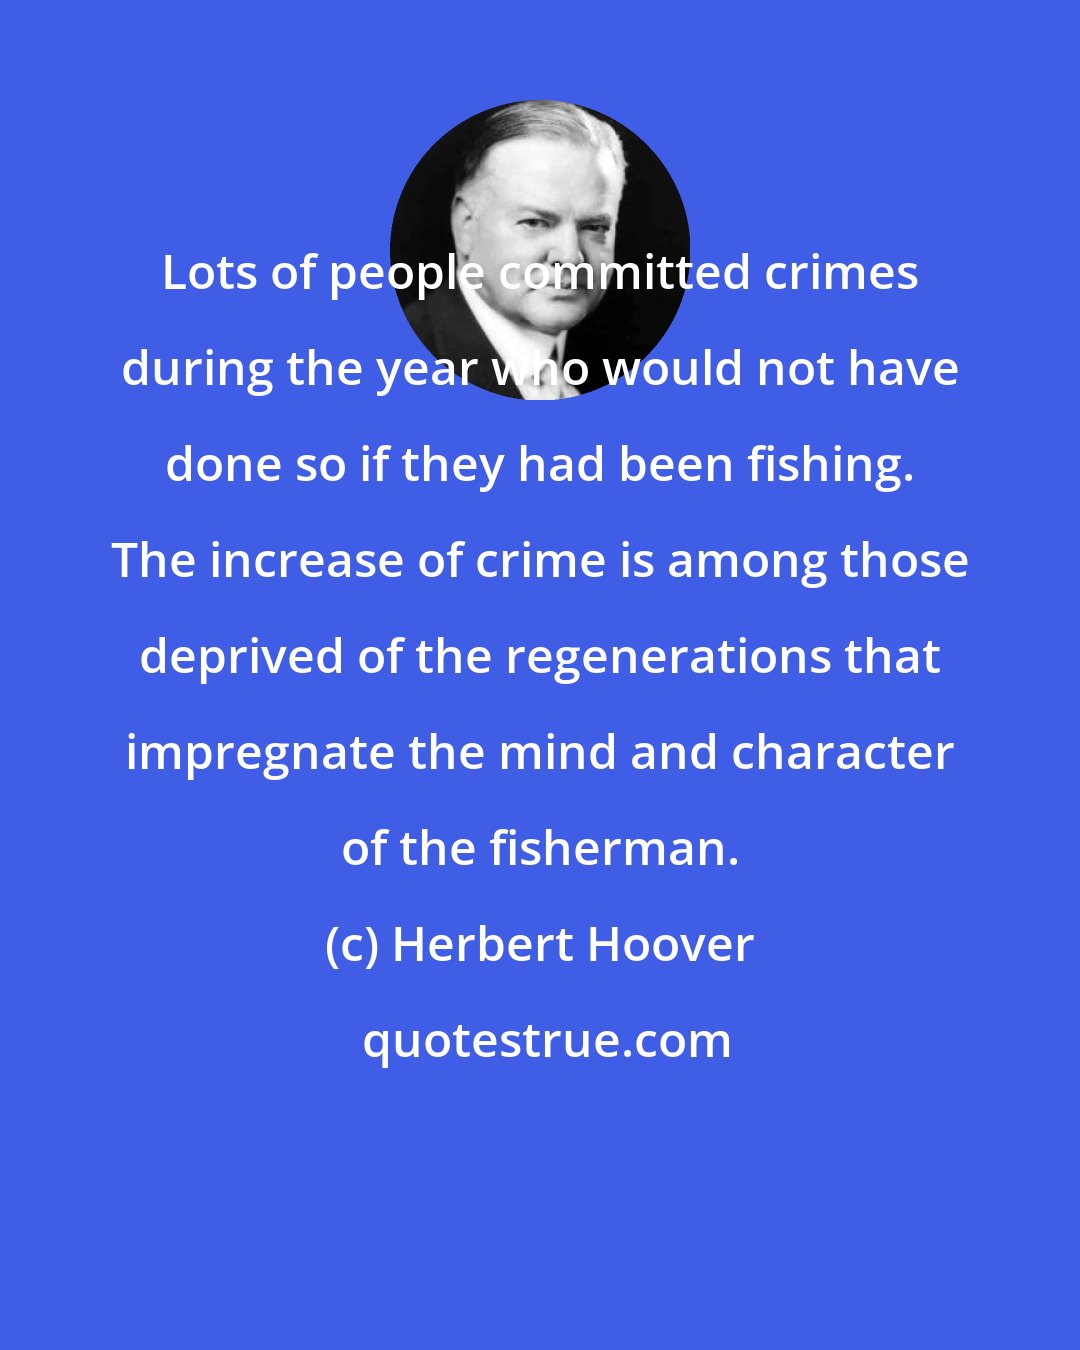 Herbert Hoover: Lots of people committed crimes during the year who would not have done so if they had been fishing. The increase of crime is among those deprived of the regenerations that impregnate the mind and character of the fisherman.